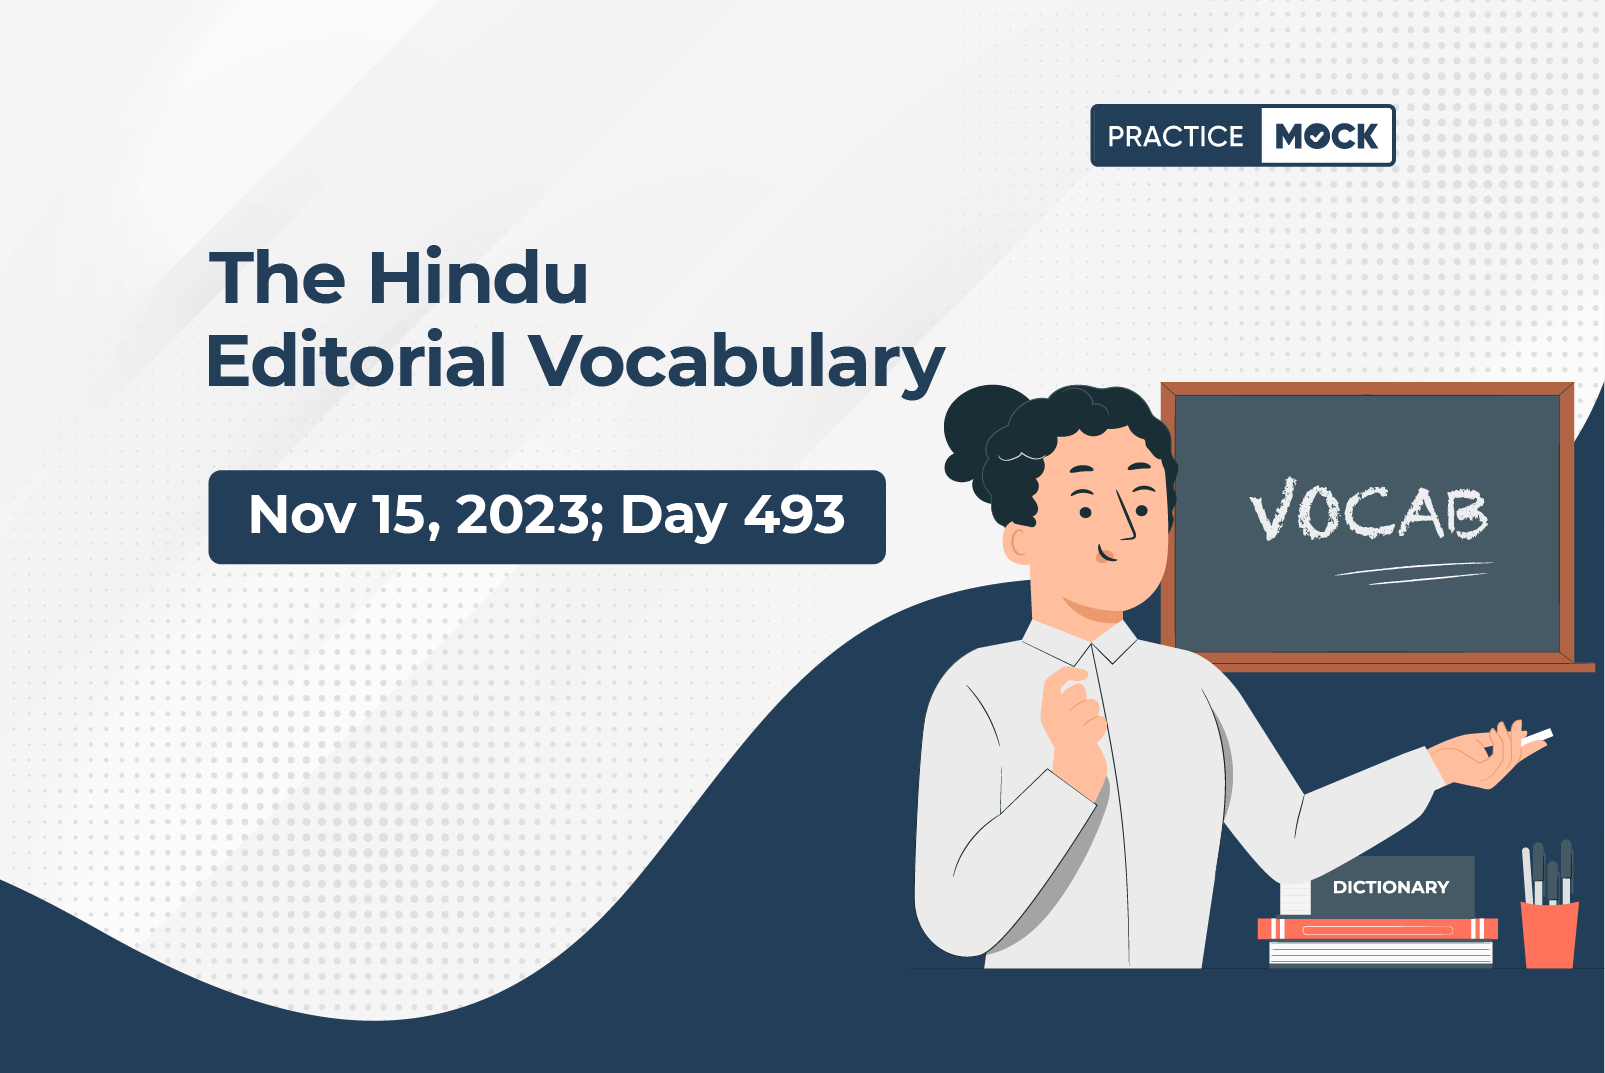 Learn For Job - 🔰 Wednesday, 13 January 2021 🔰 ○The Hindu Vocabulary For  All Competitive Exams. 1. DISMANTLE (VERB): (विघटित करना) : take apart  Synonyms: pull apart, deconstruct Antonyms: assemble Example